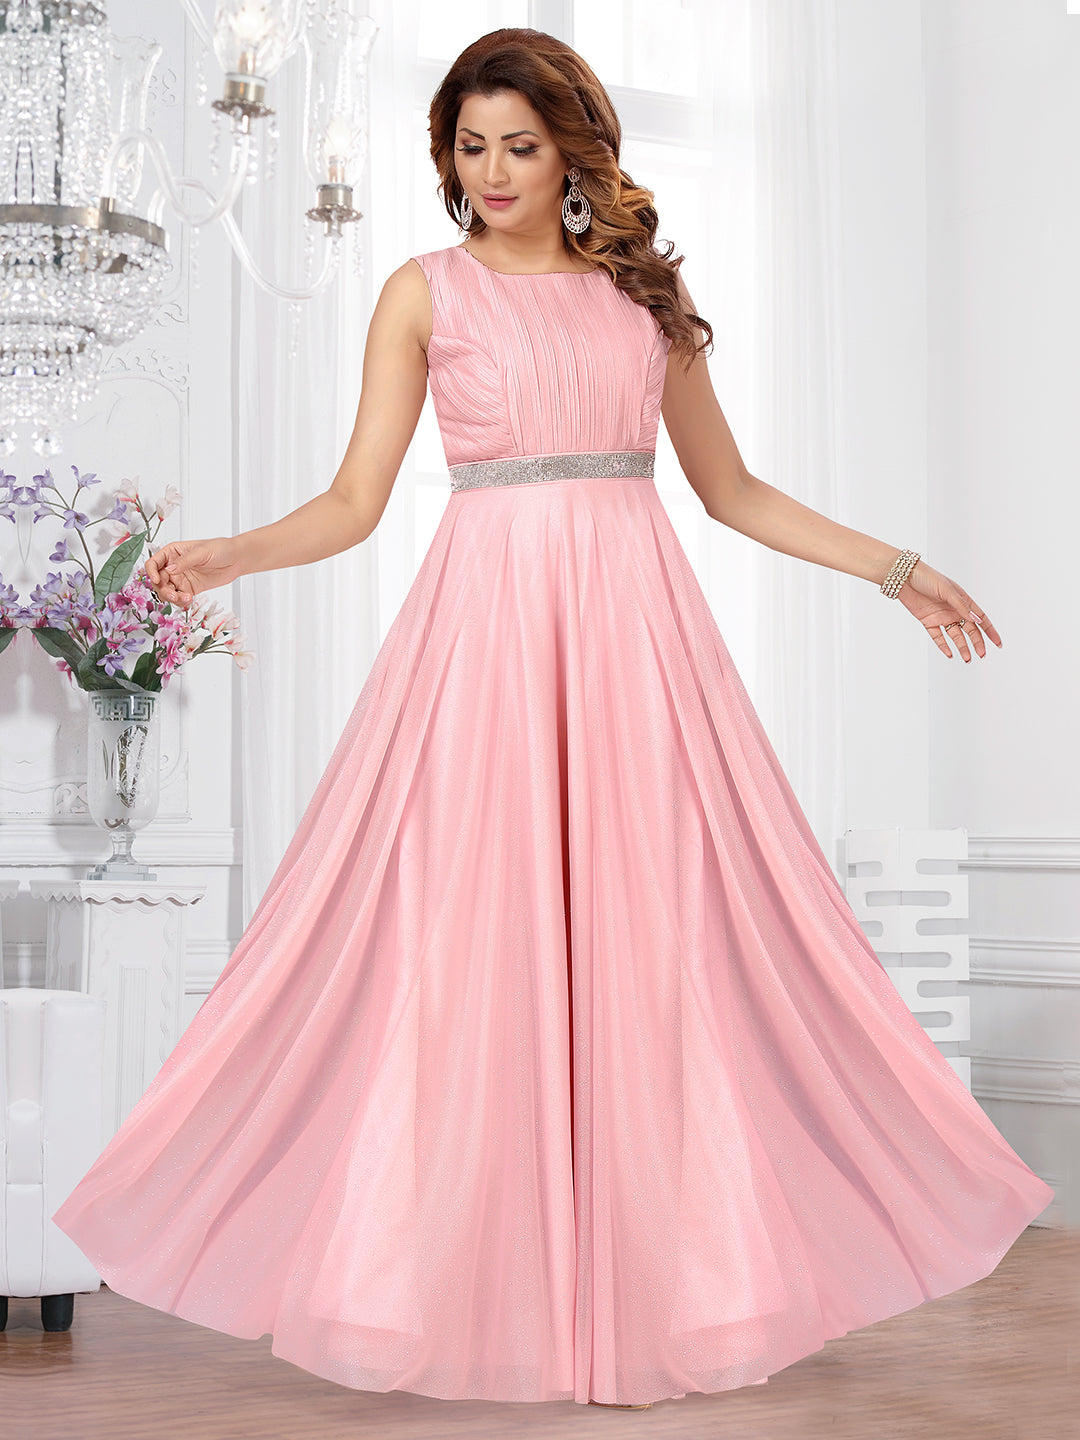 Party Gowns - Buy Party Gowns online in India